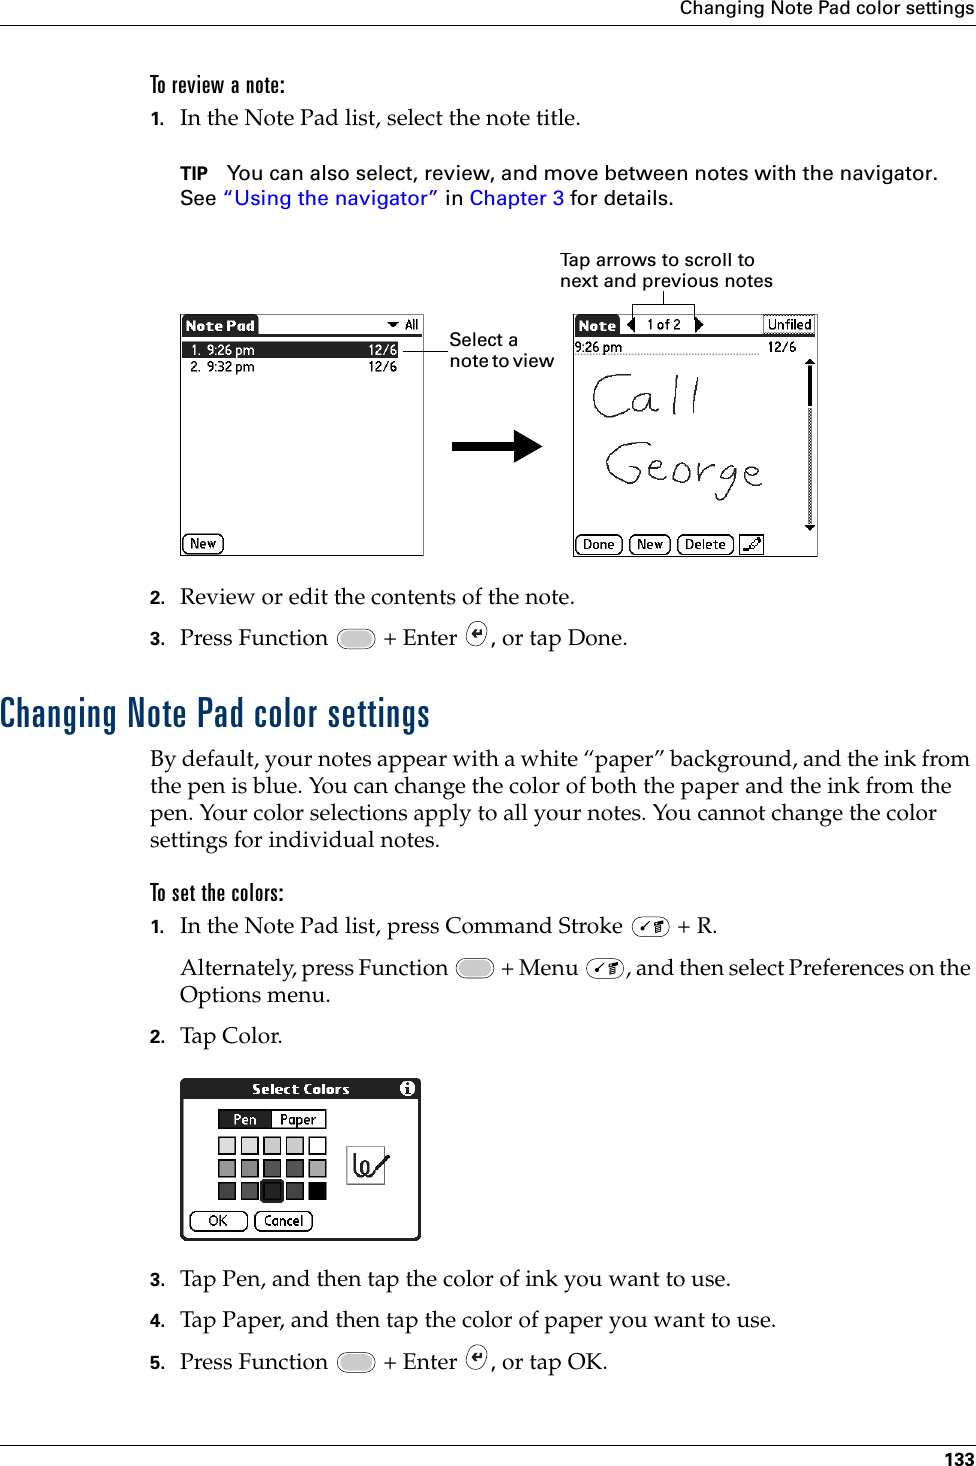 Changing Note Pad color settings133To review a note:1. In the Note Pad list, select the note title.TIP You can also select, review, and move between notes with the navigator. See “Using the navigator” in Chapter 3 for details.2. Review or edit the contents of the note. 3. Press Function   + Enter  , or tap Done.Changing Note Pad color settingsBy default, your notes appear with a white “paper” background, and the ink from the pen is blue. You can change the color of both the paper and the ink from the pen. Your color selections apply to all your notes. You cannot change the color settings for individual notes.To set the colors:1. In the Note Pad list, press Command Stroke   + R.Alternately, press Function   + Menu  , and then select Preferences on the Options menu.2. Tap Co lor.3. Tap Pen, and then tap the color of ink you want to use.4. Tap Paper, and then tap the color of paper you want to use.5. Press Function   + Enter  , or tap OK.Tap arrows to scroll to next and previous notesSelect a note to view Palm, Inc. Confidential